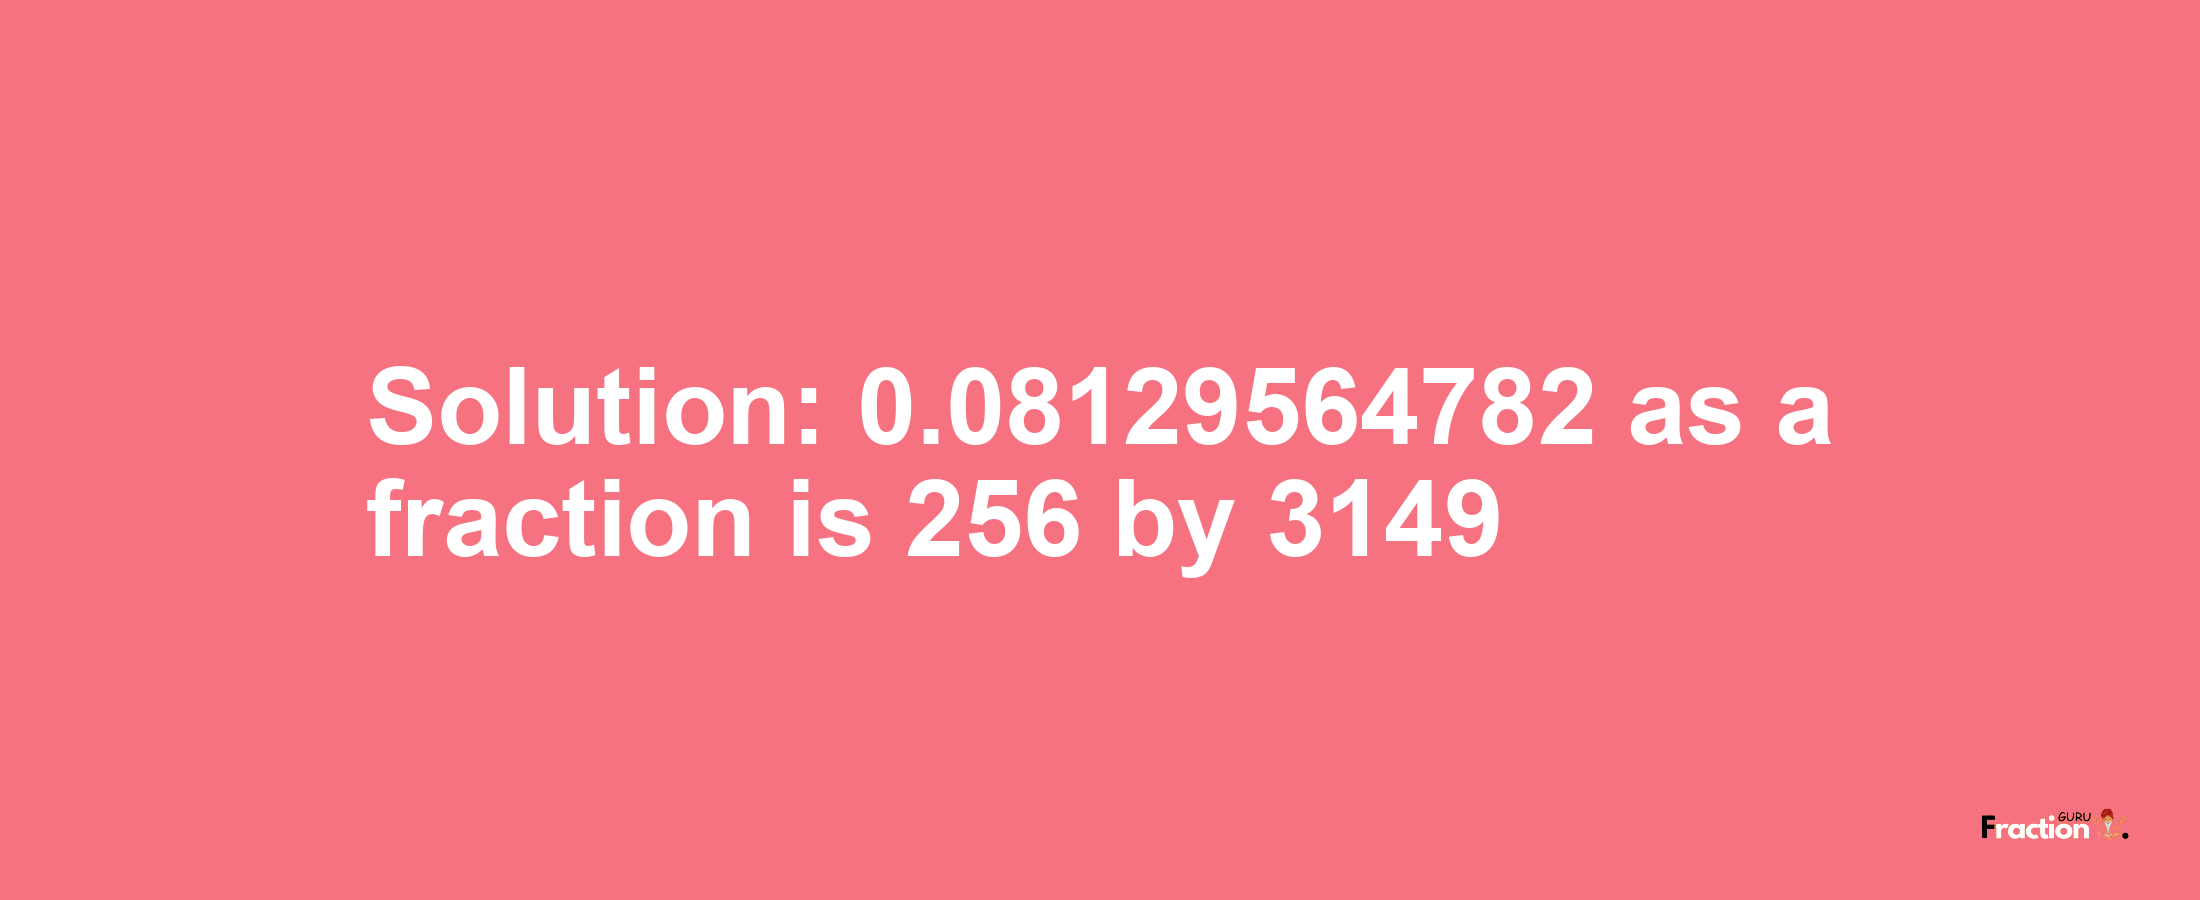 Solution:0.08129564782 as a fraction is 256/3149